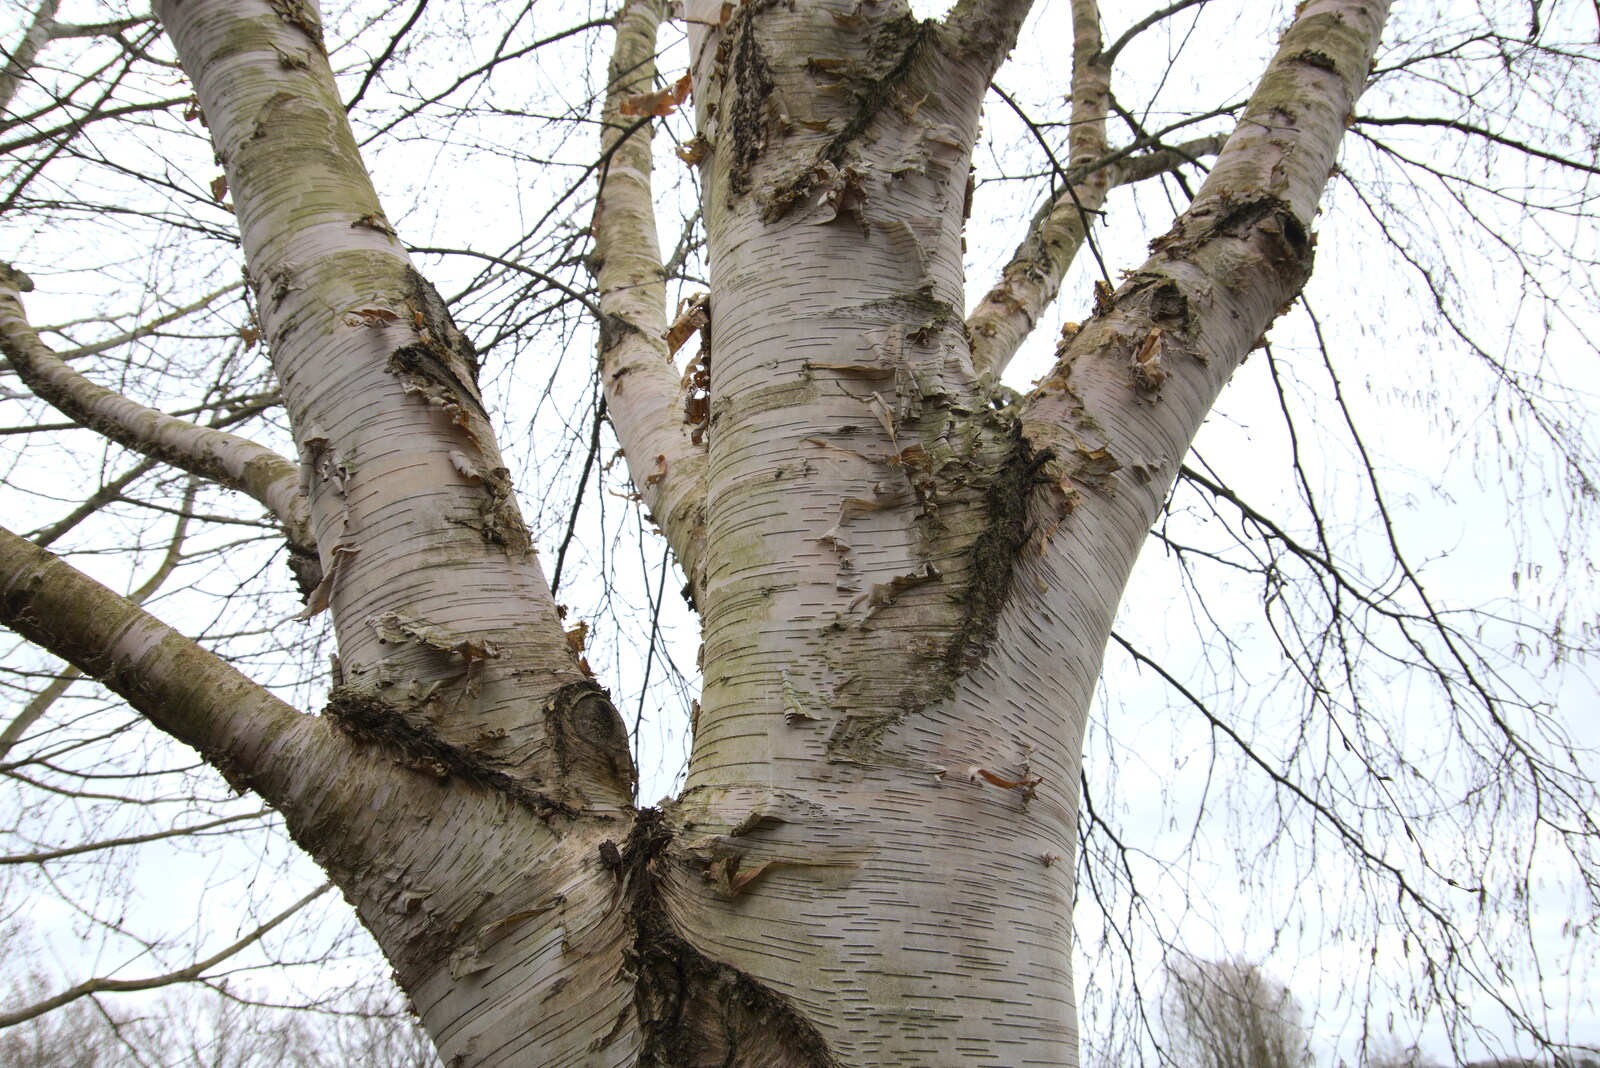 Nice silver birch bark from A Return to Bressingham Steam and Gardens, Bressingham, Norfolk - 28th March 2021